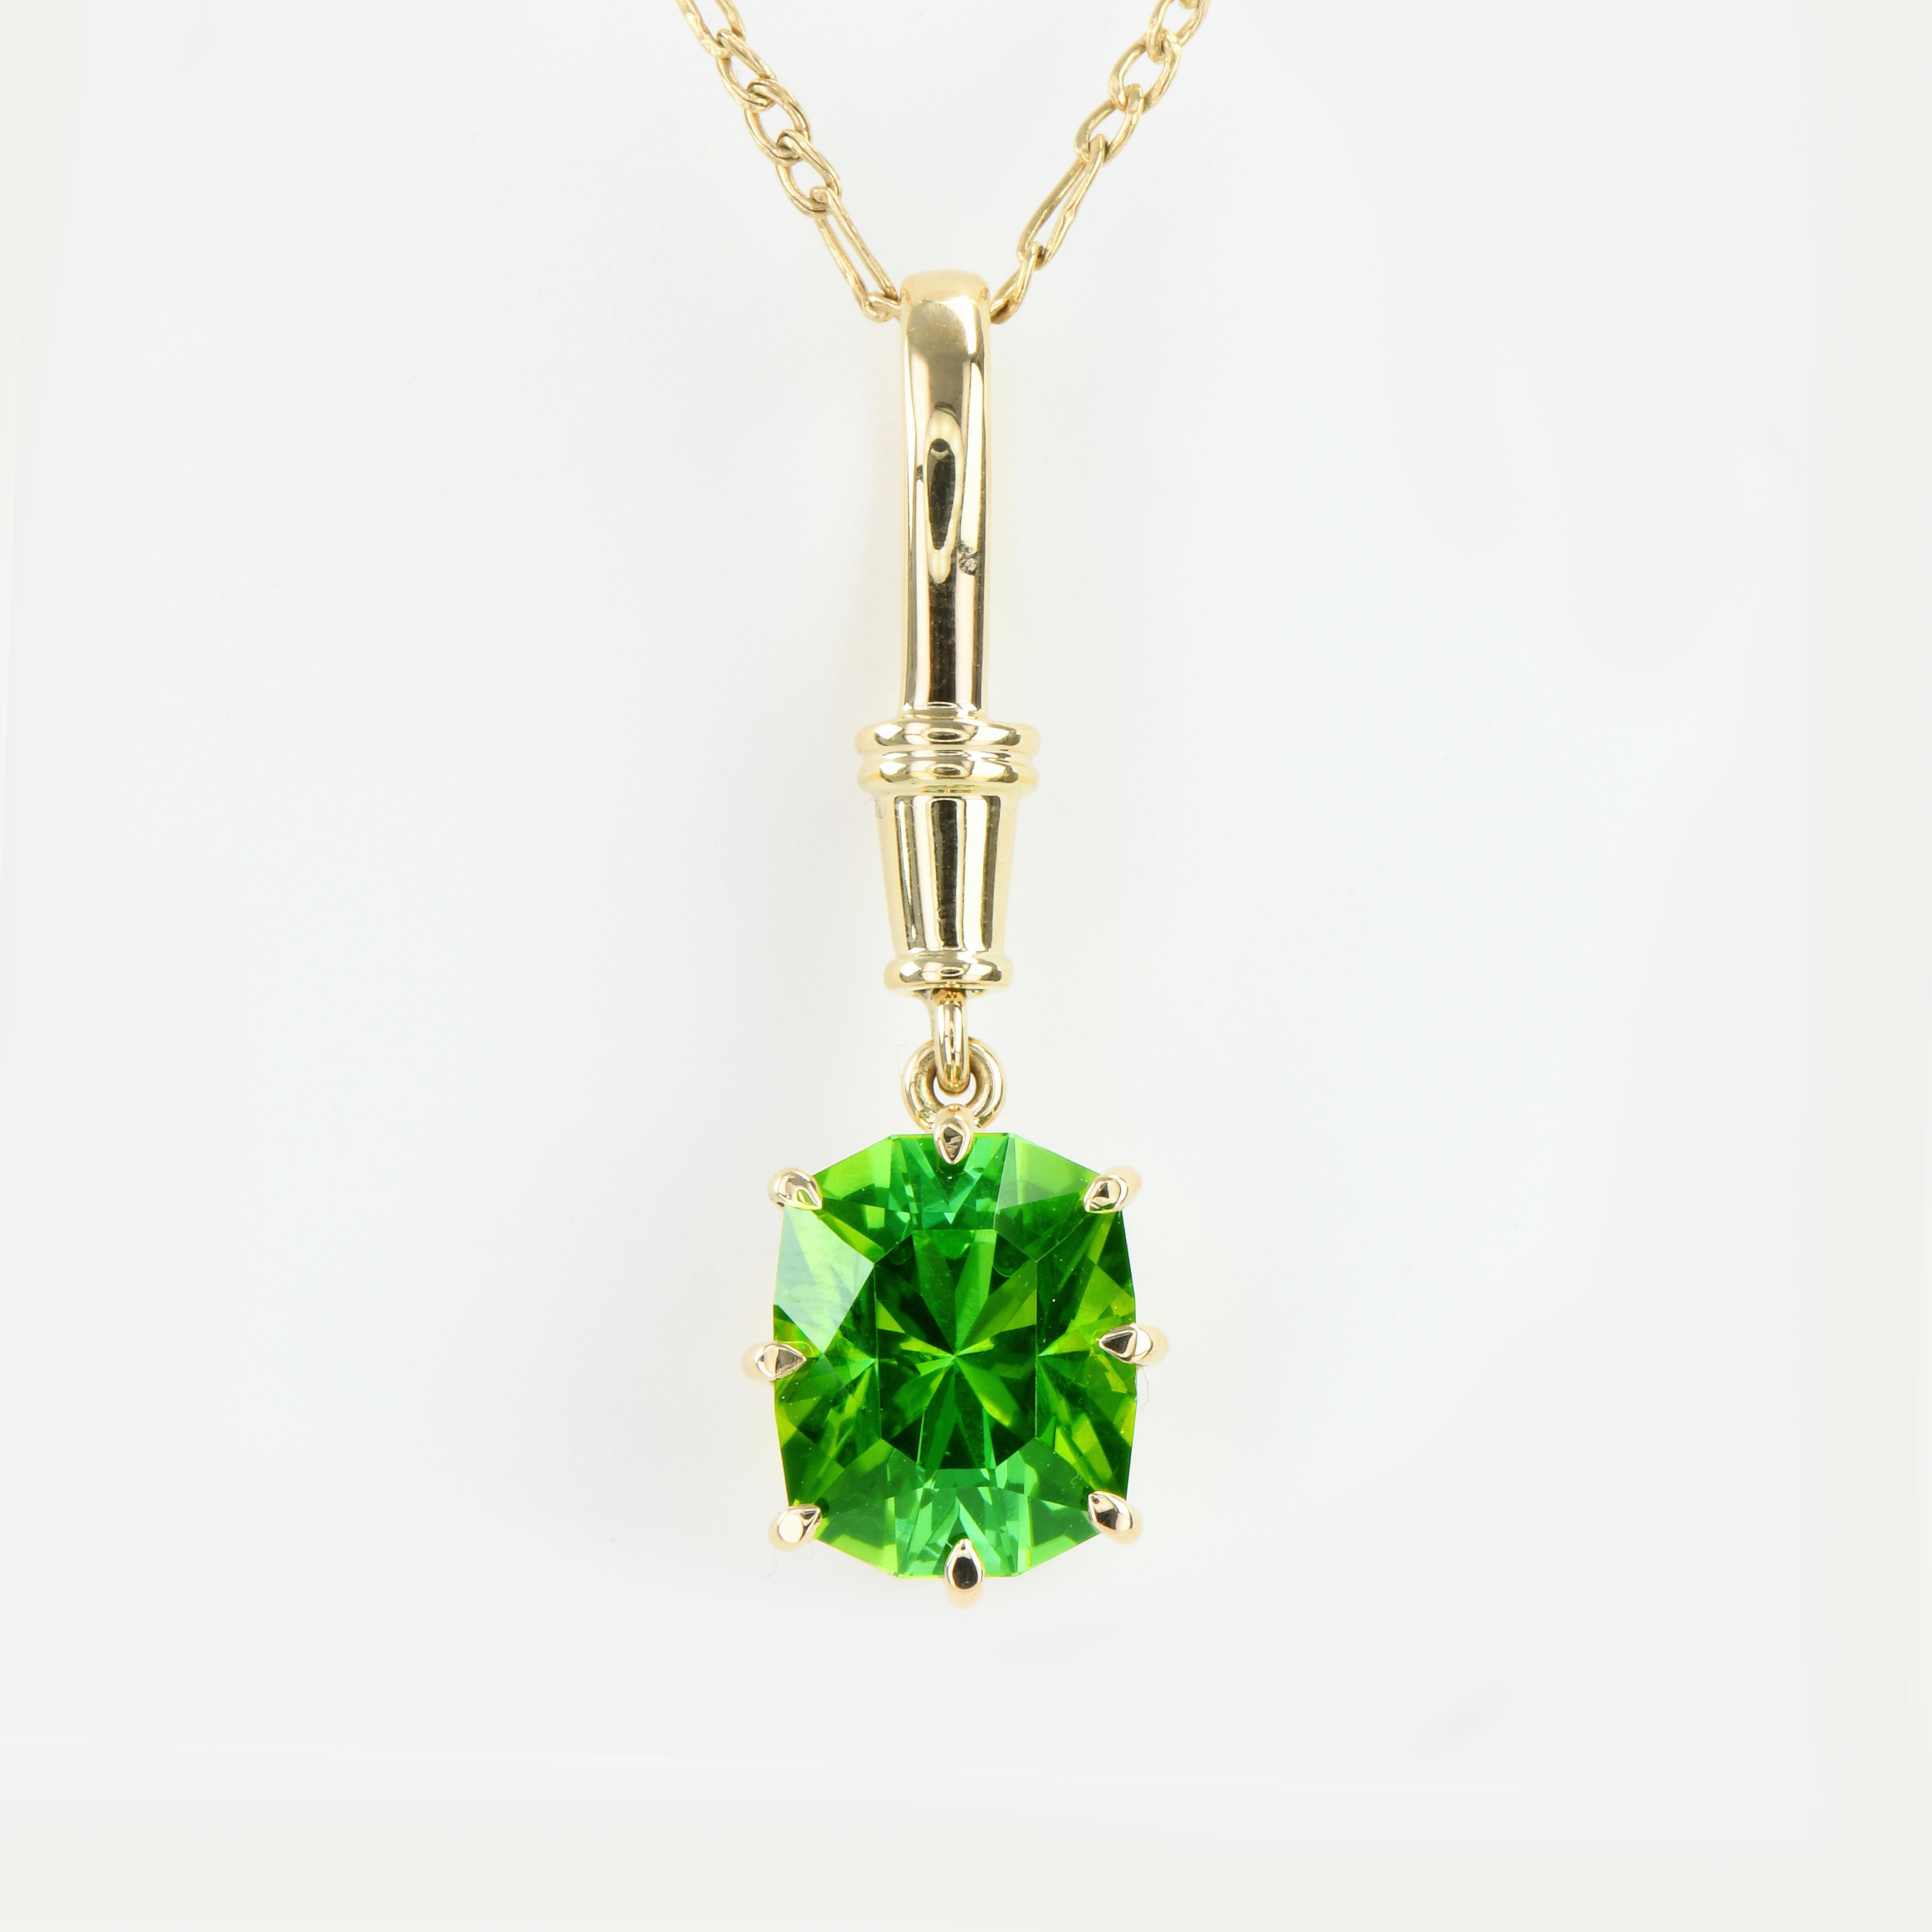 Brilliant Cut 6.64ct Green Tourmaline Pendant-Barion Cut, 18KT Yellow Gold, GIA Certified-Rare For Sale